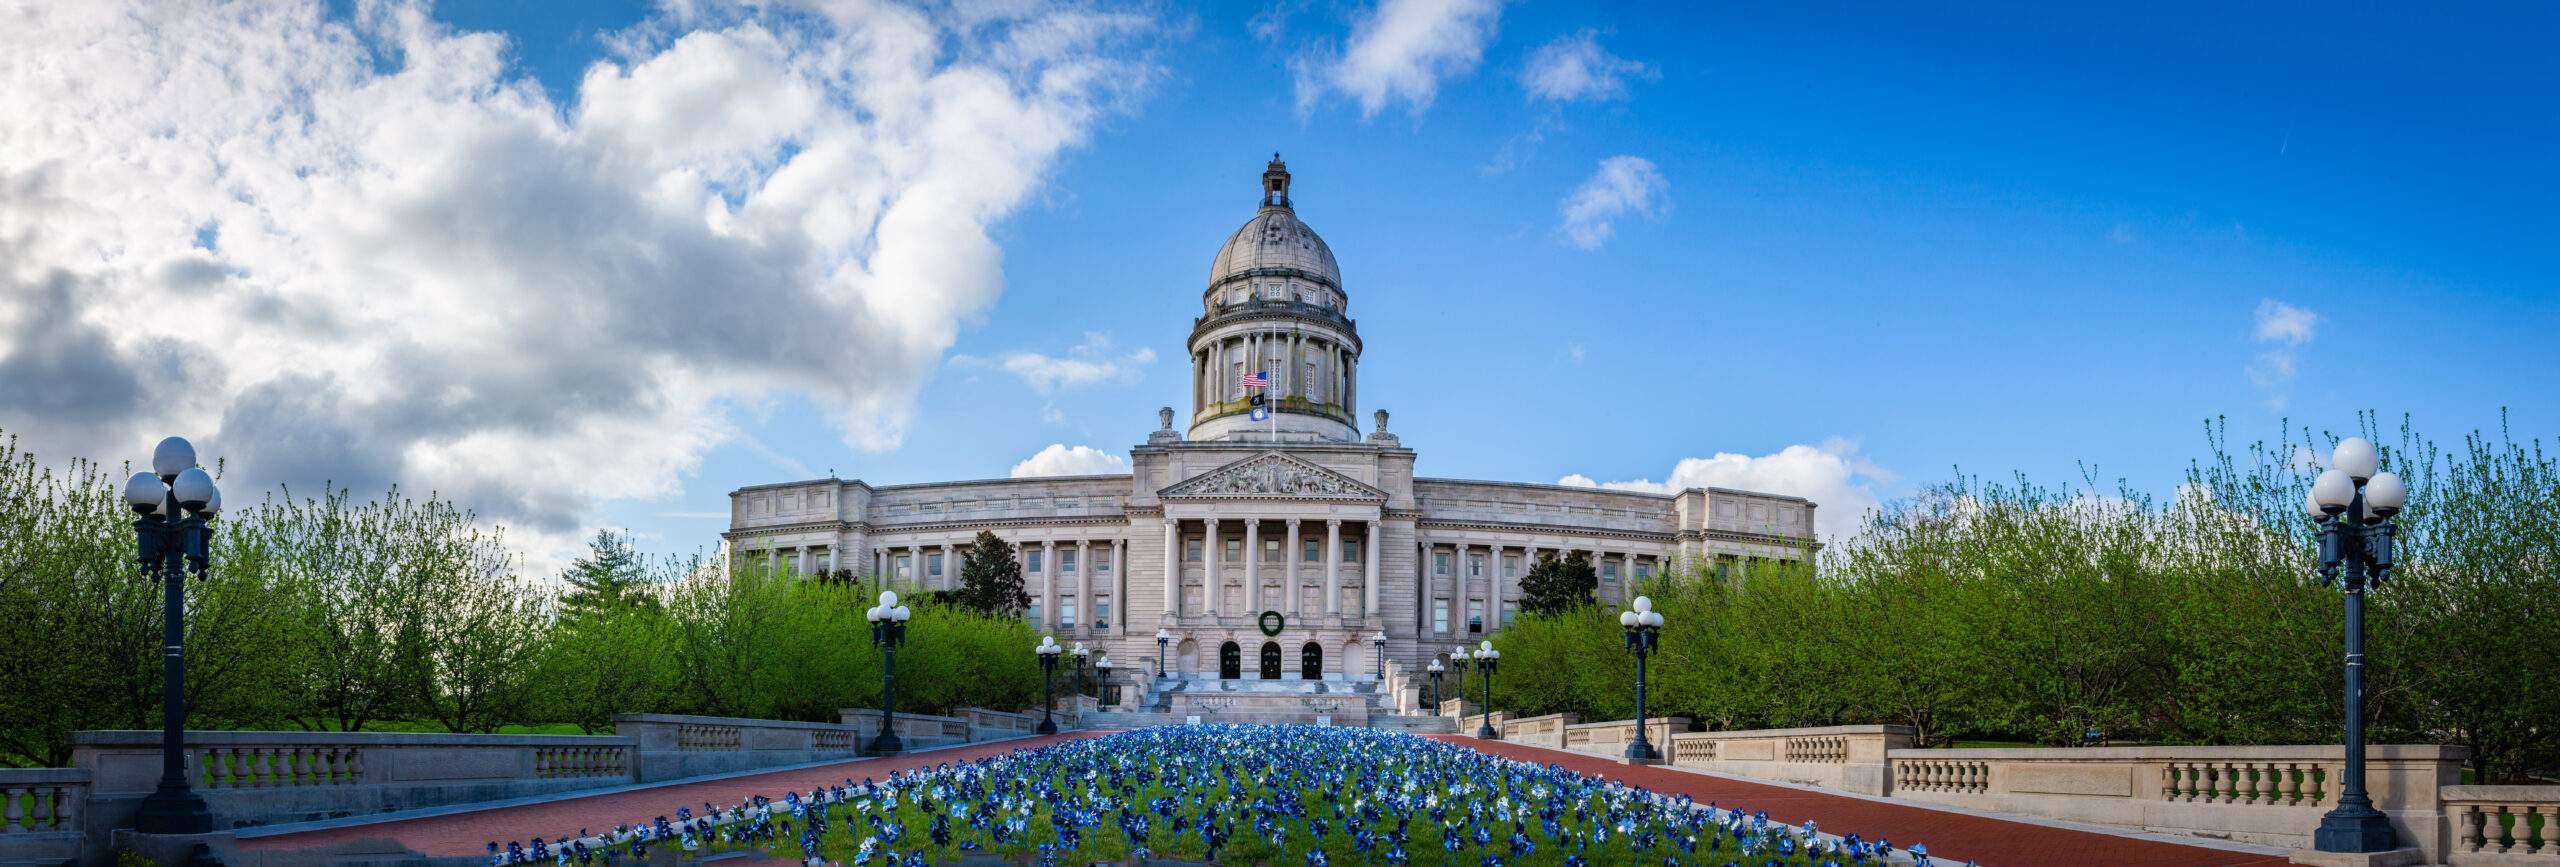 Income tax cut bill passed through the Kentucky Senate, headed to governor’s desk